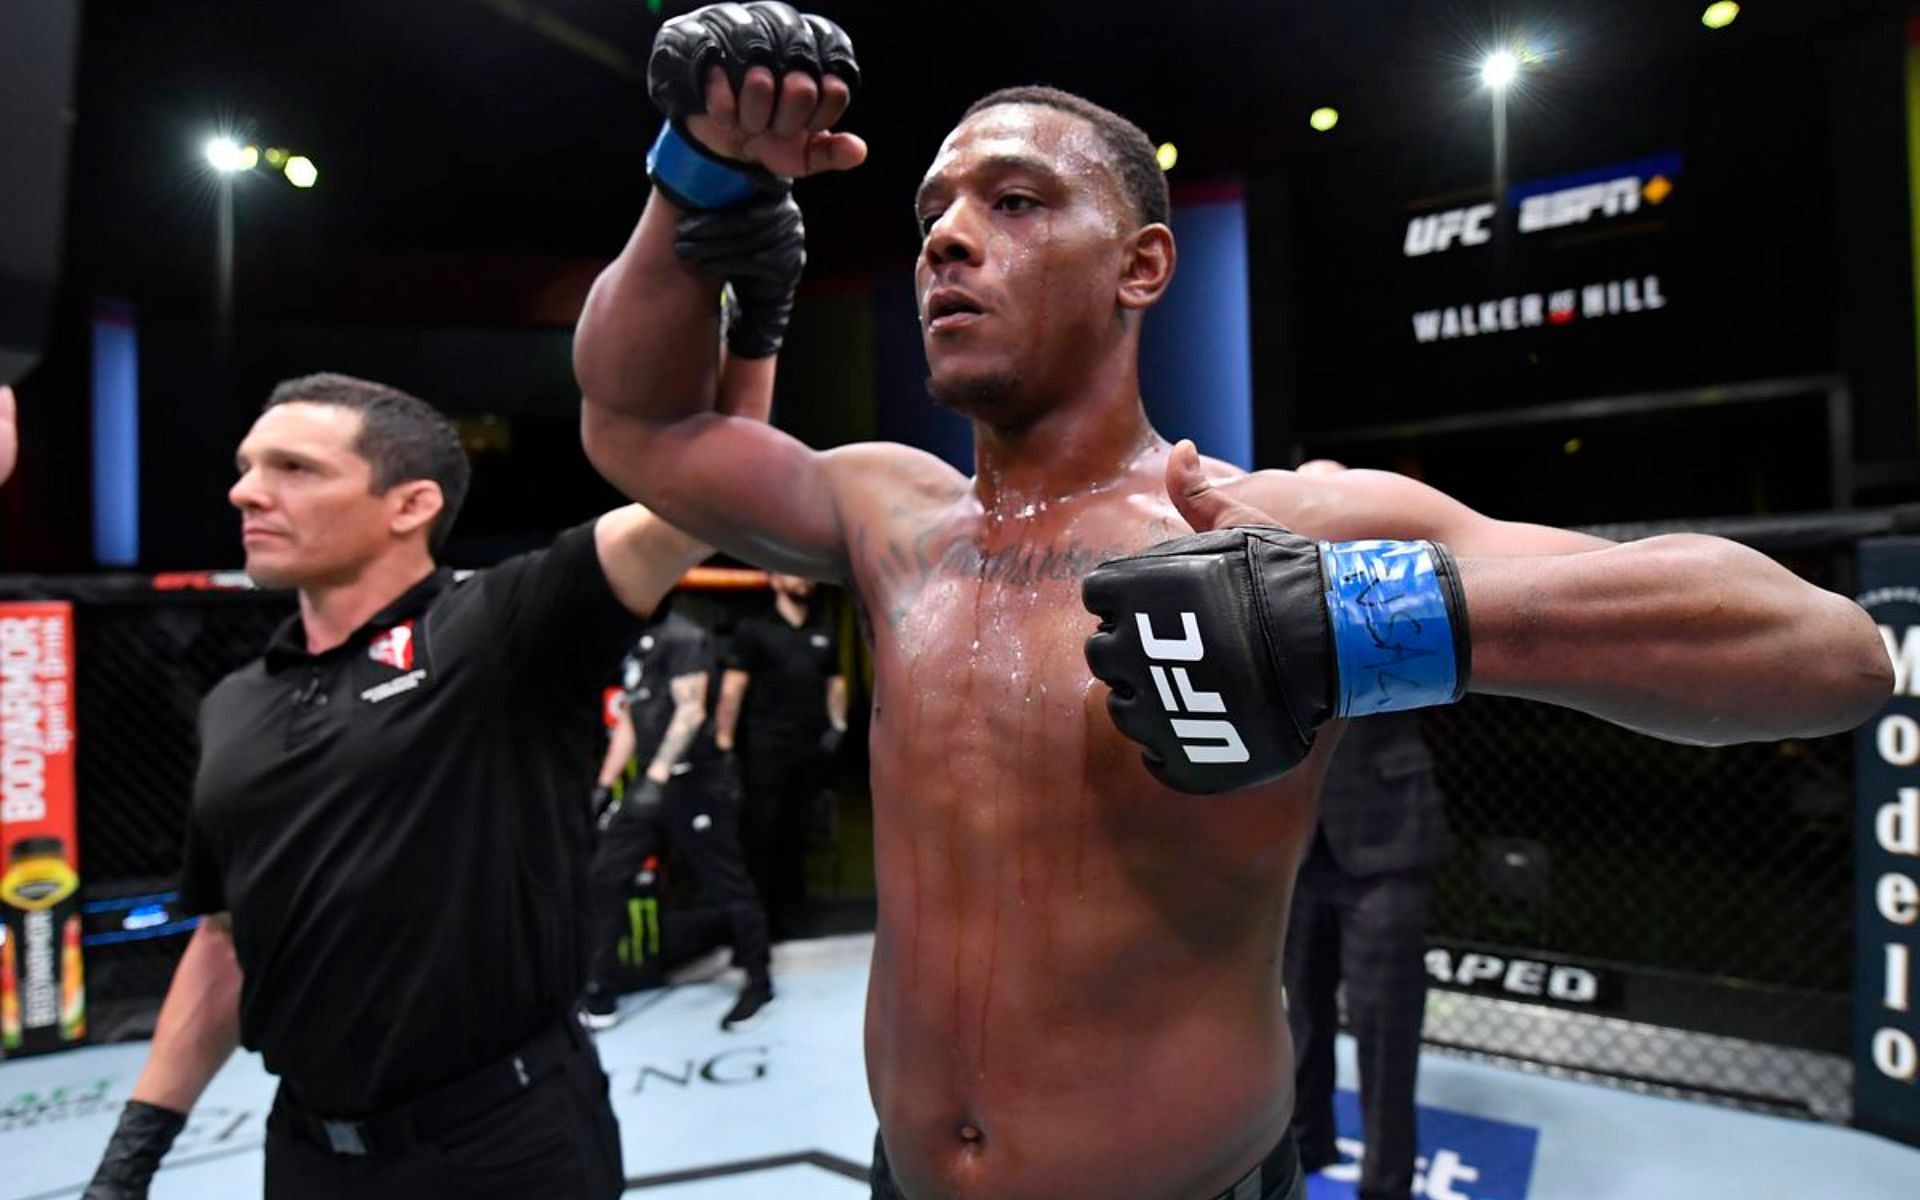 Could Jamahal Hill surprise fans by capturing the UFC light heavyweight title in the future?